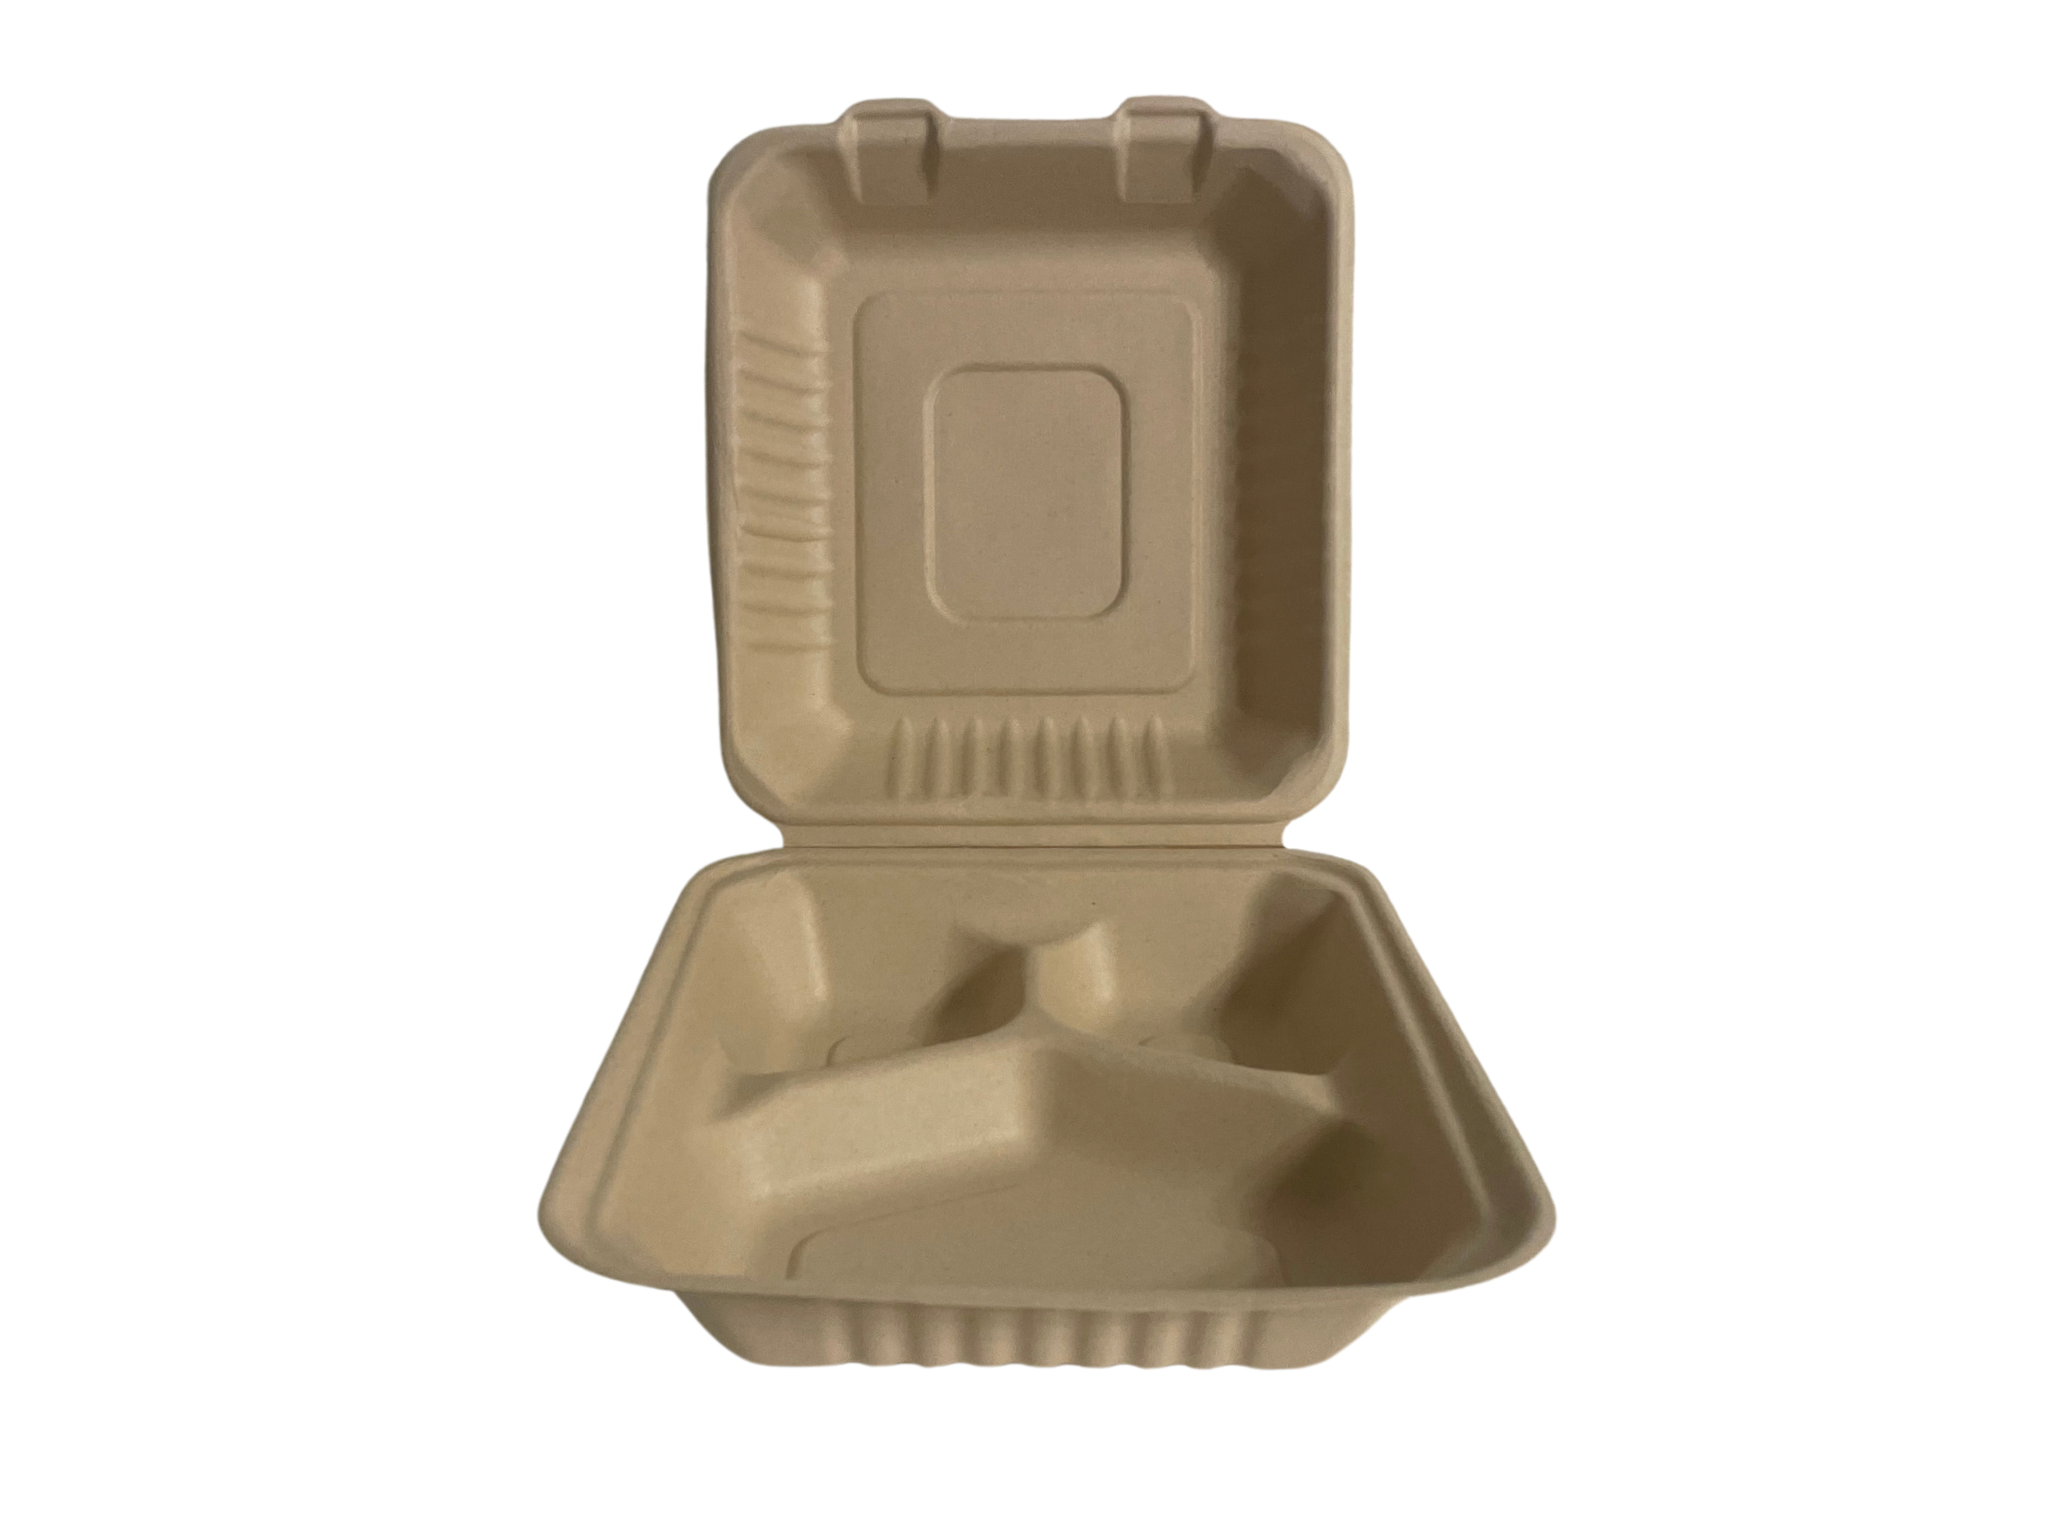 8-Inch Fiber Clamshell - Soil Compostable- Eco-Friendly Container